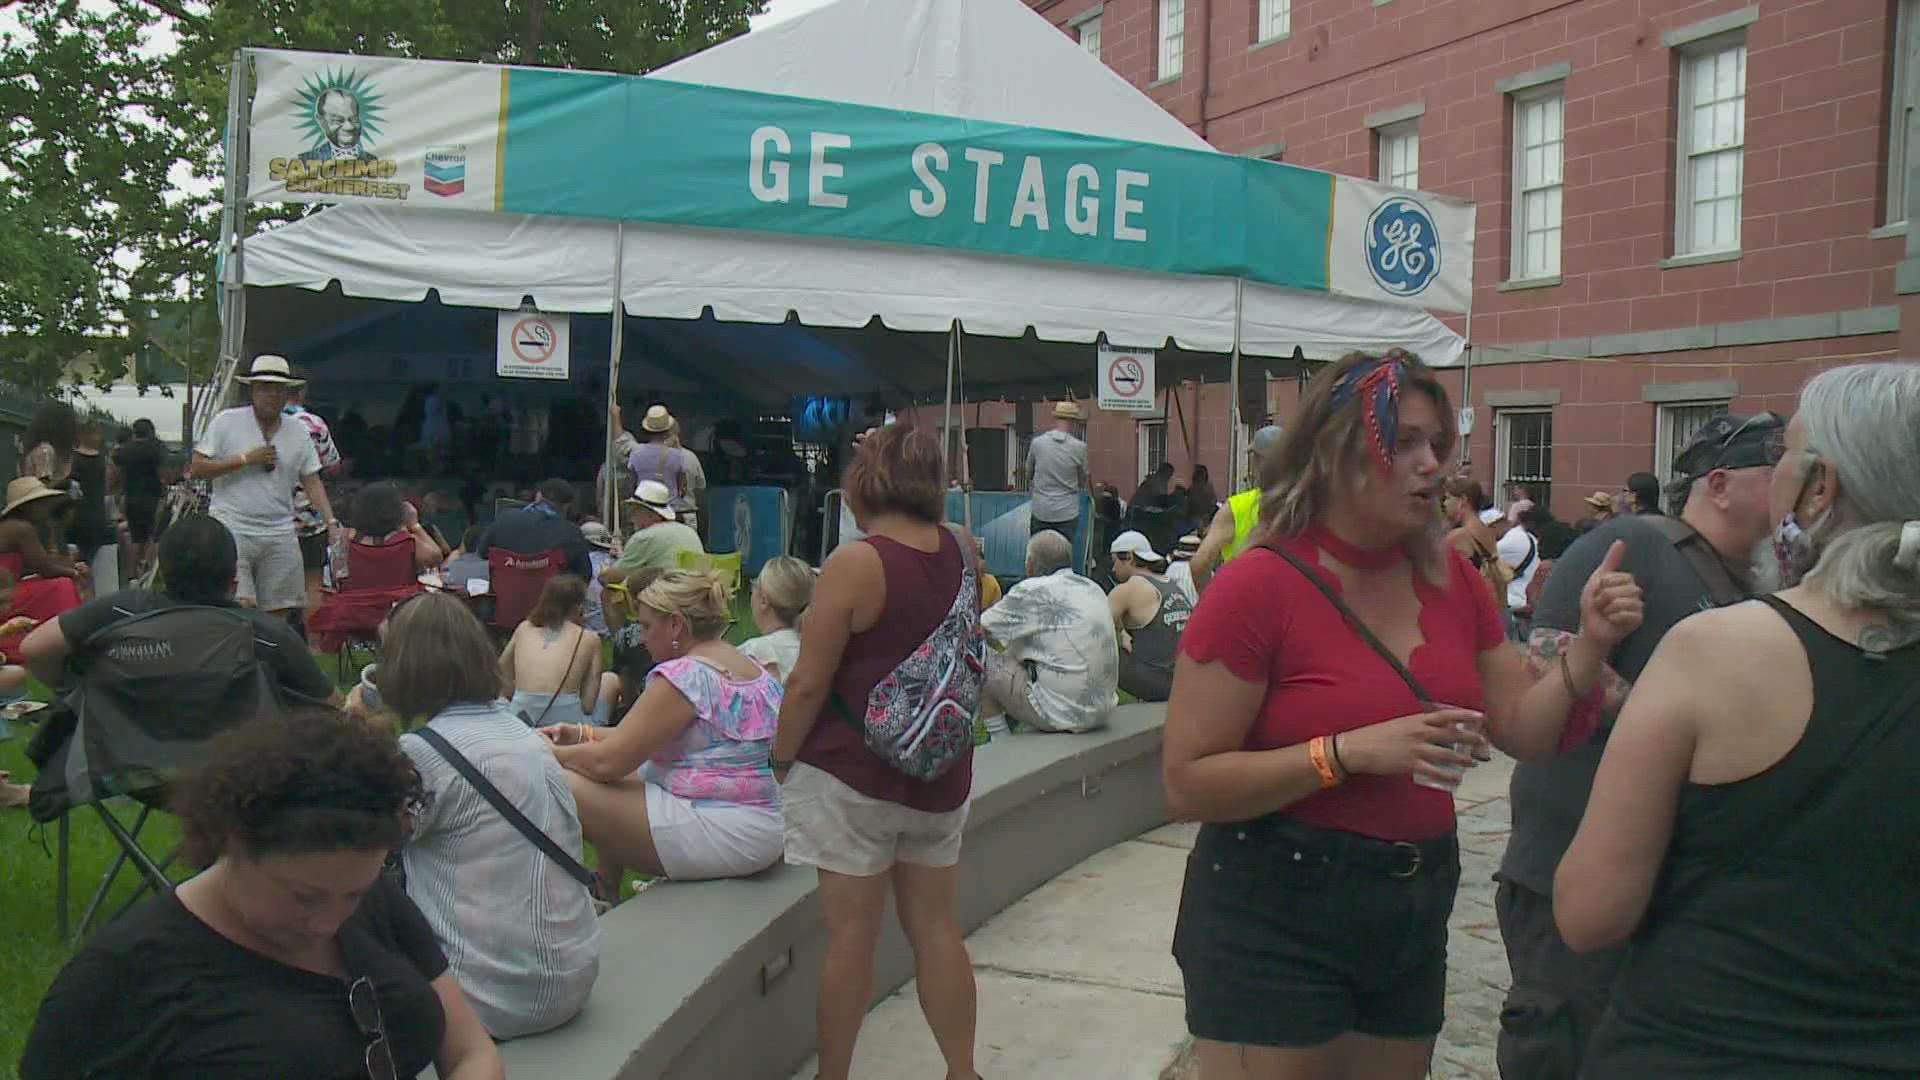 Festival season made its return to the city with the first being the traditional Satchmo Summerfest. Fest-goers celebrated safely as covid is still prominent.